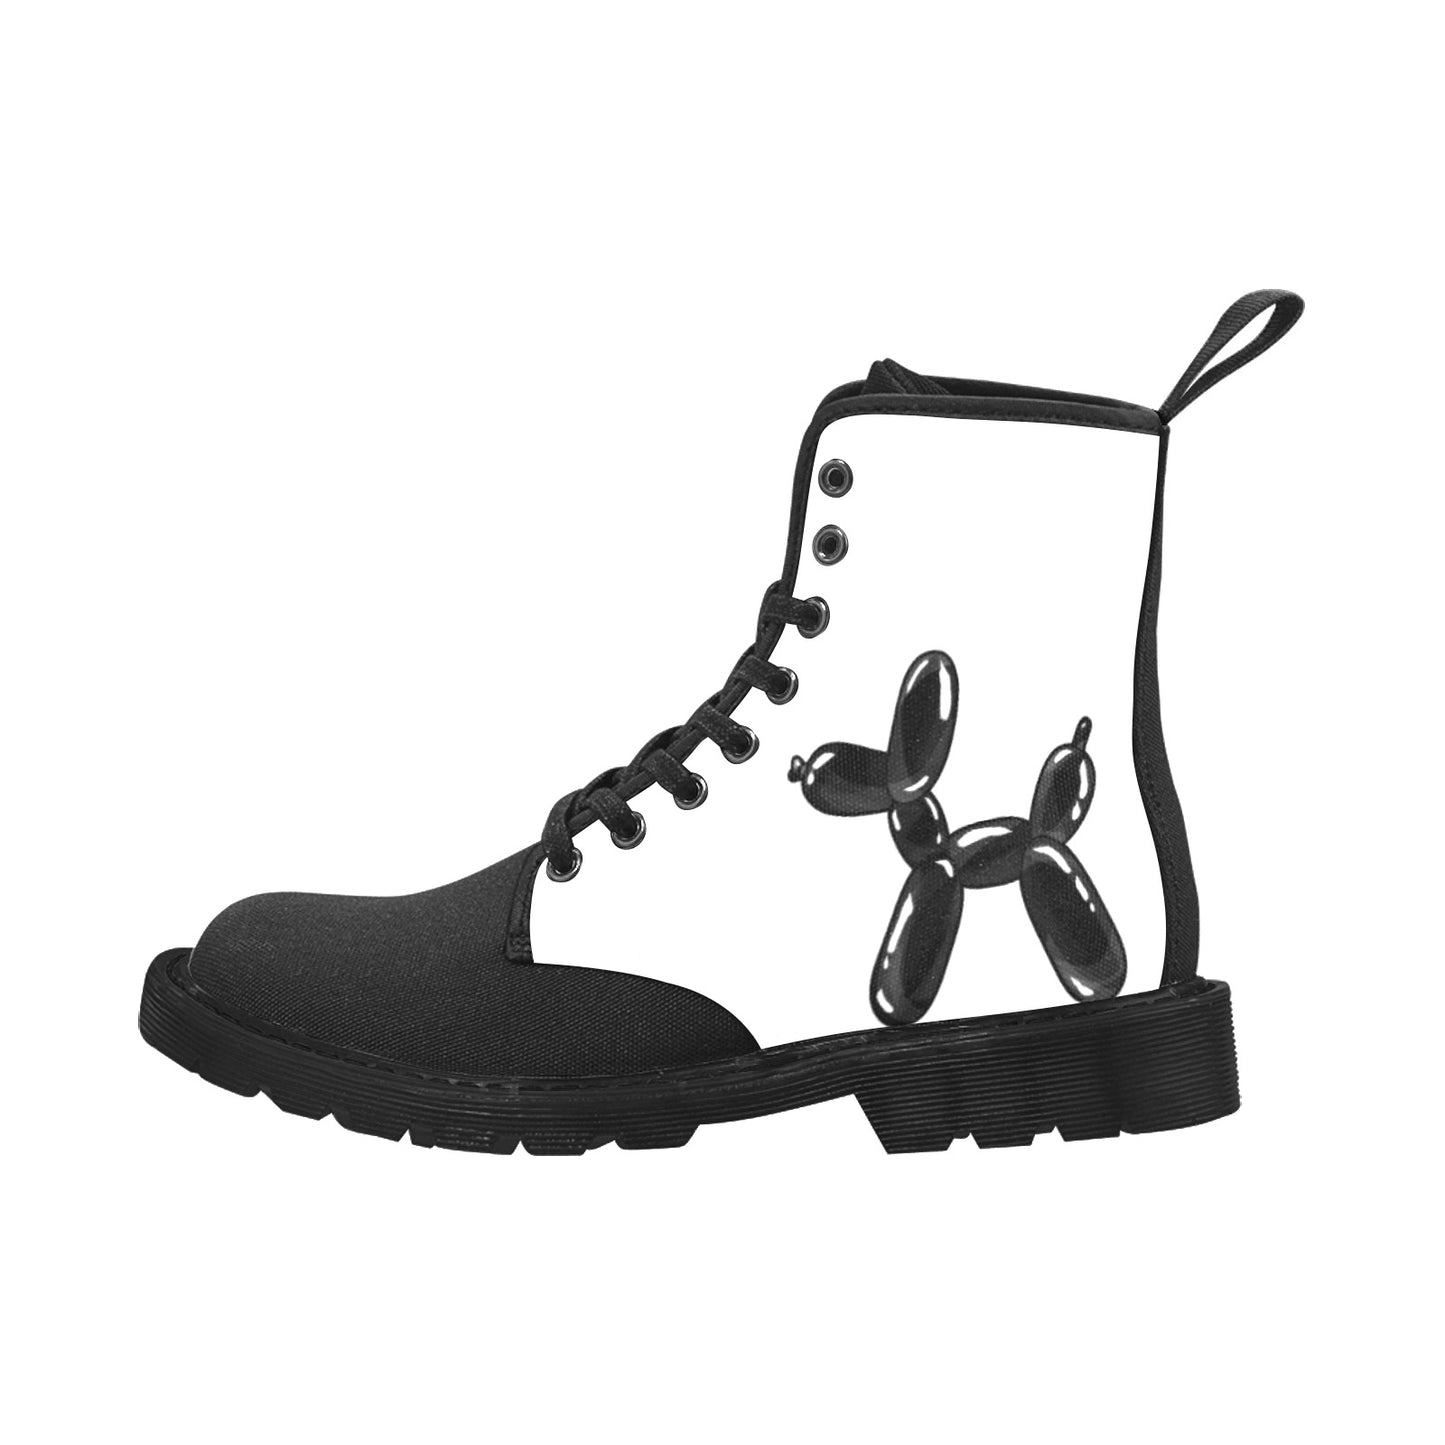 Black and white Combat boots with balloon dogs for Balloon Twisting